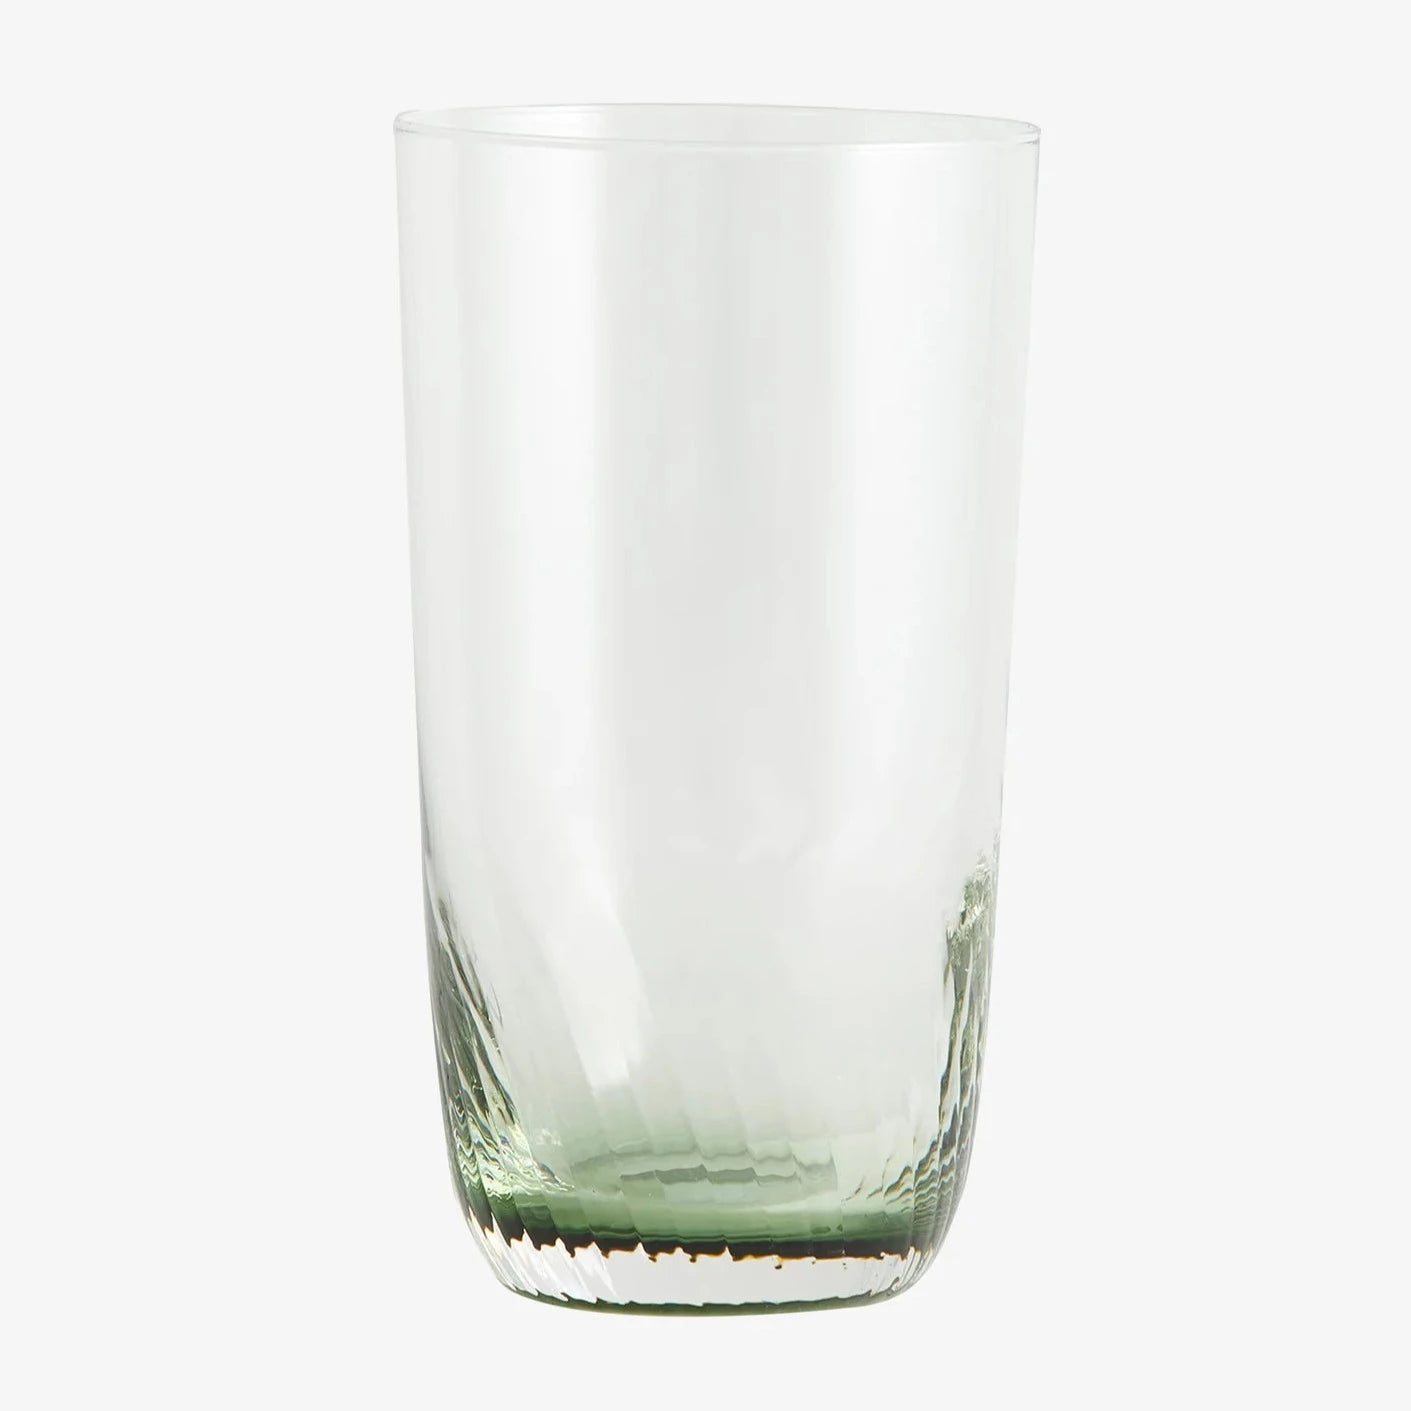 Set of 2 Green Drinking Glass